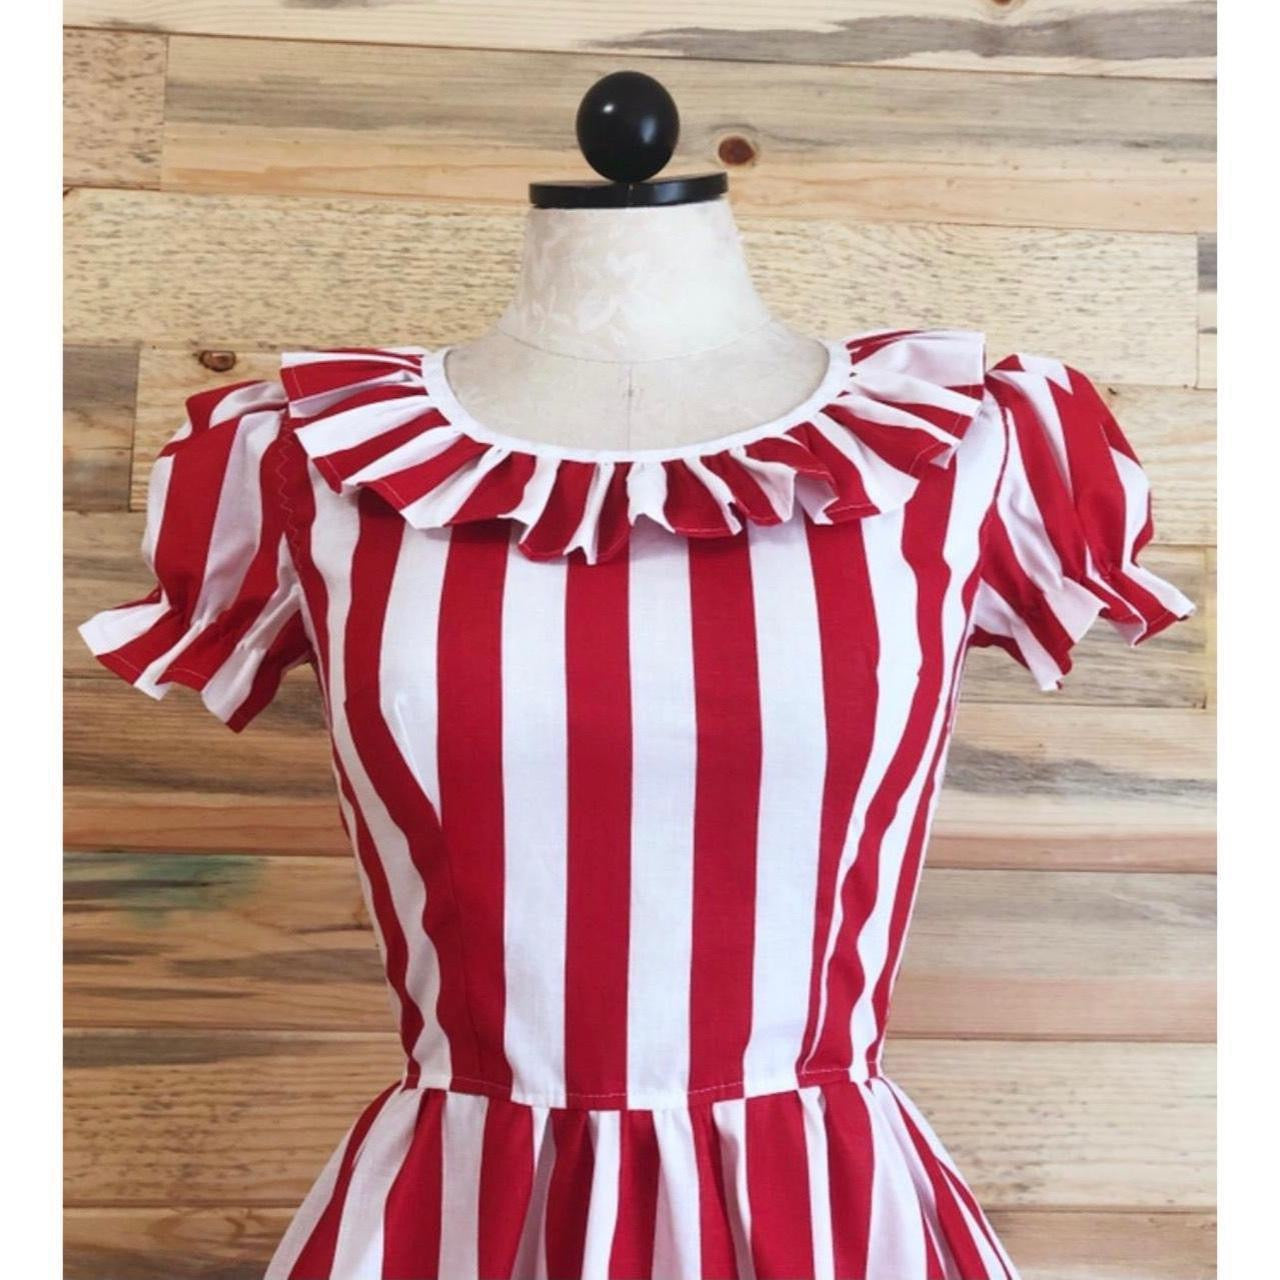 The Square Dance Dress in Red and White